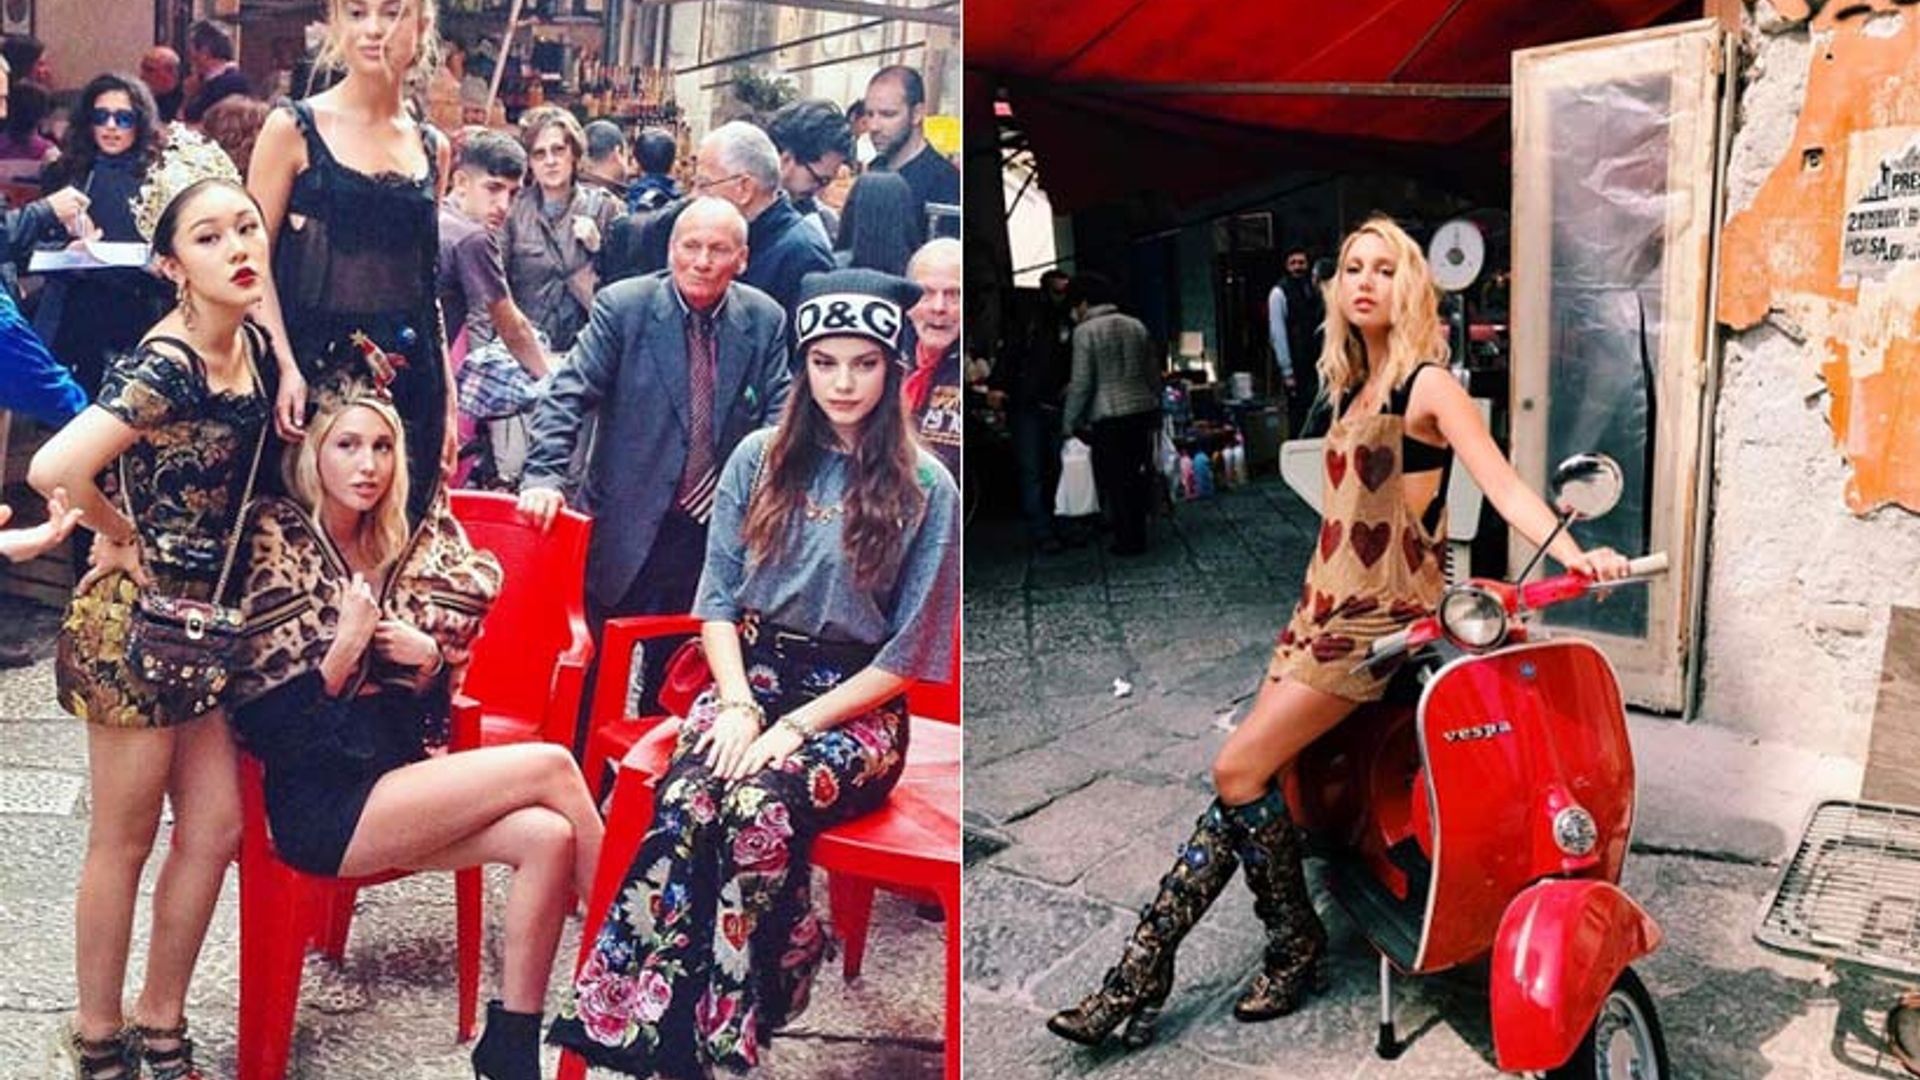 Princess Olympia and Lady Amelia Windsor hit the streets of Italy for Dolce & Gabbana campaign